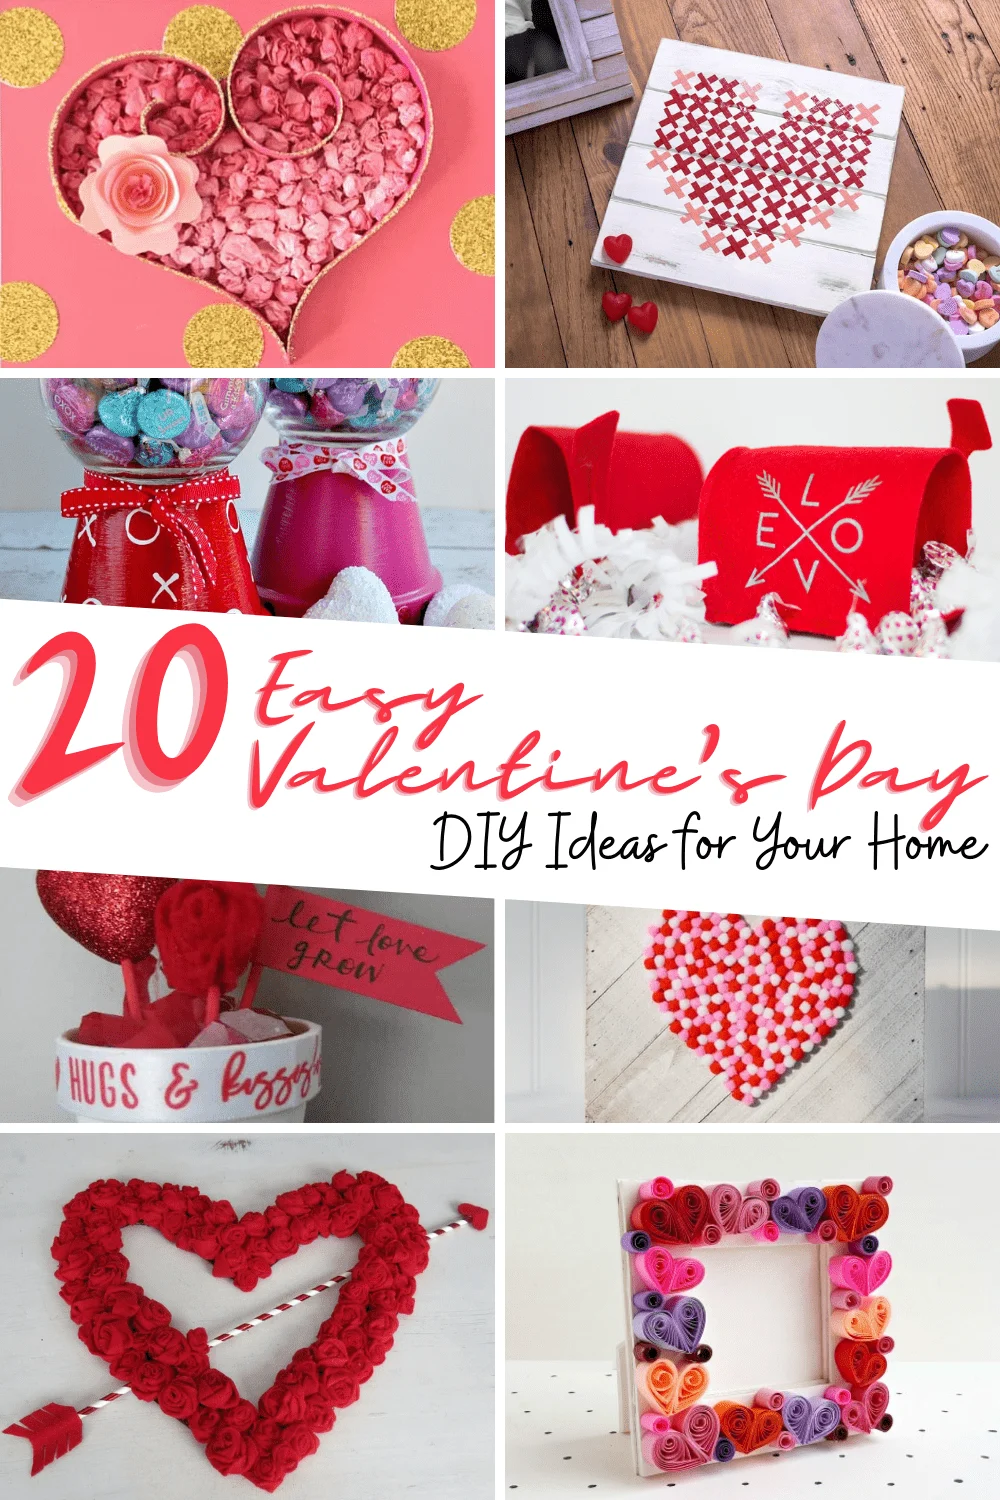 Inexpensive Valentine's Day Home Decor Ideas - Clean and Scentsible